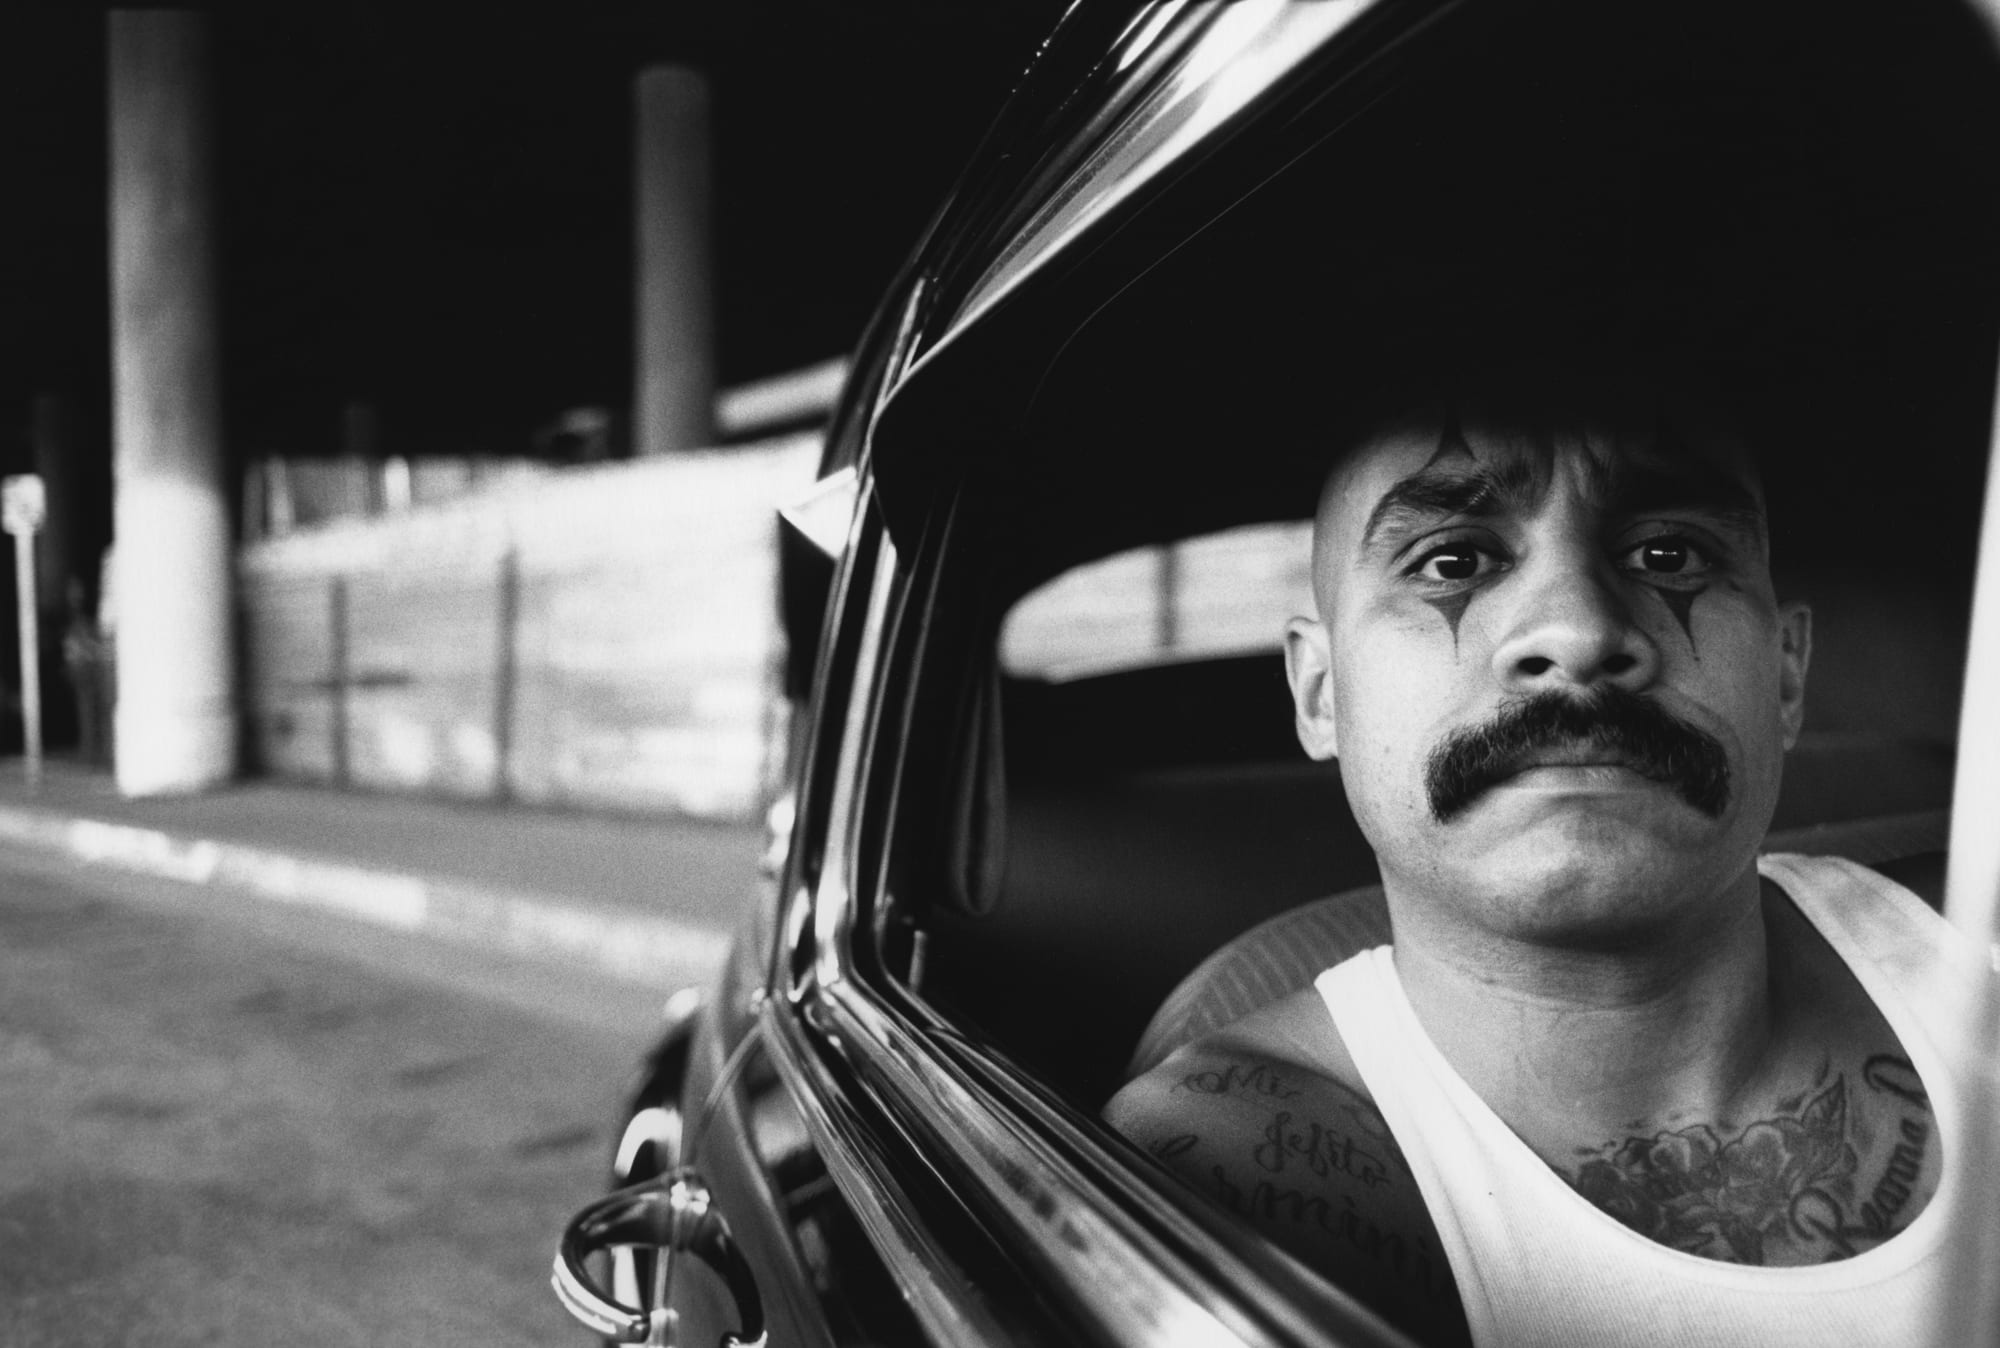 man with clown tattoos around eyes sitting on a car, looking out a window